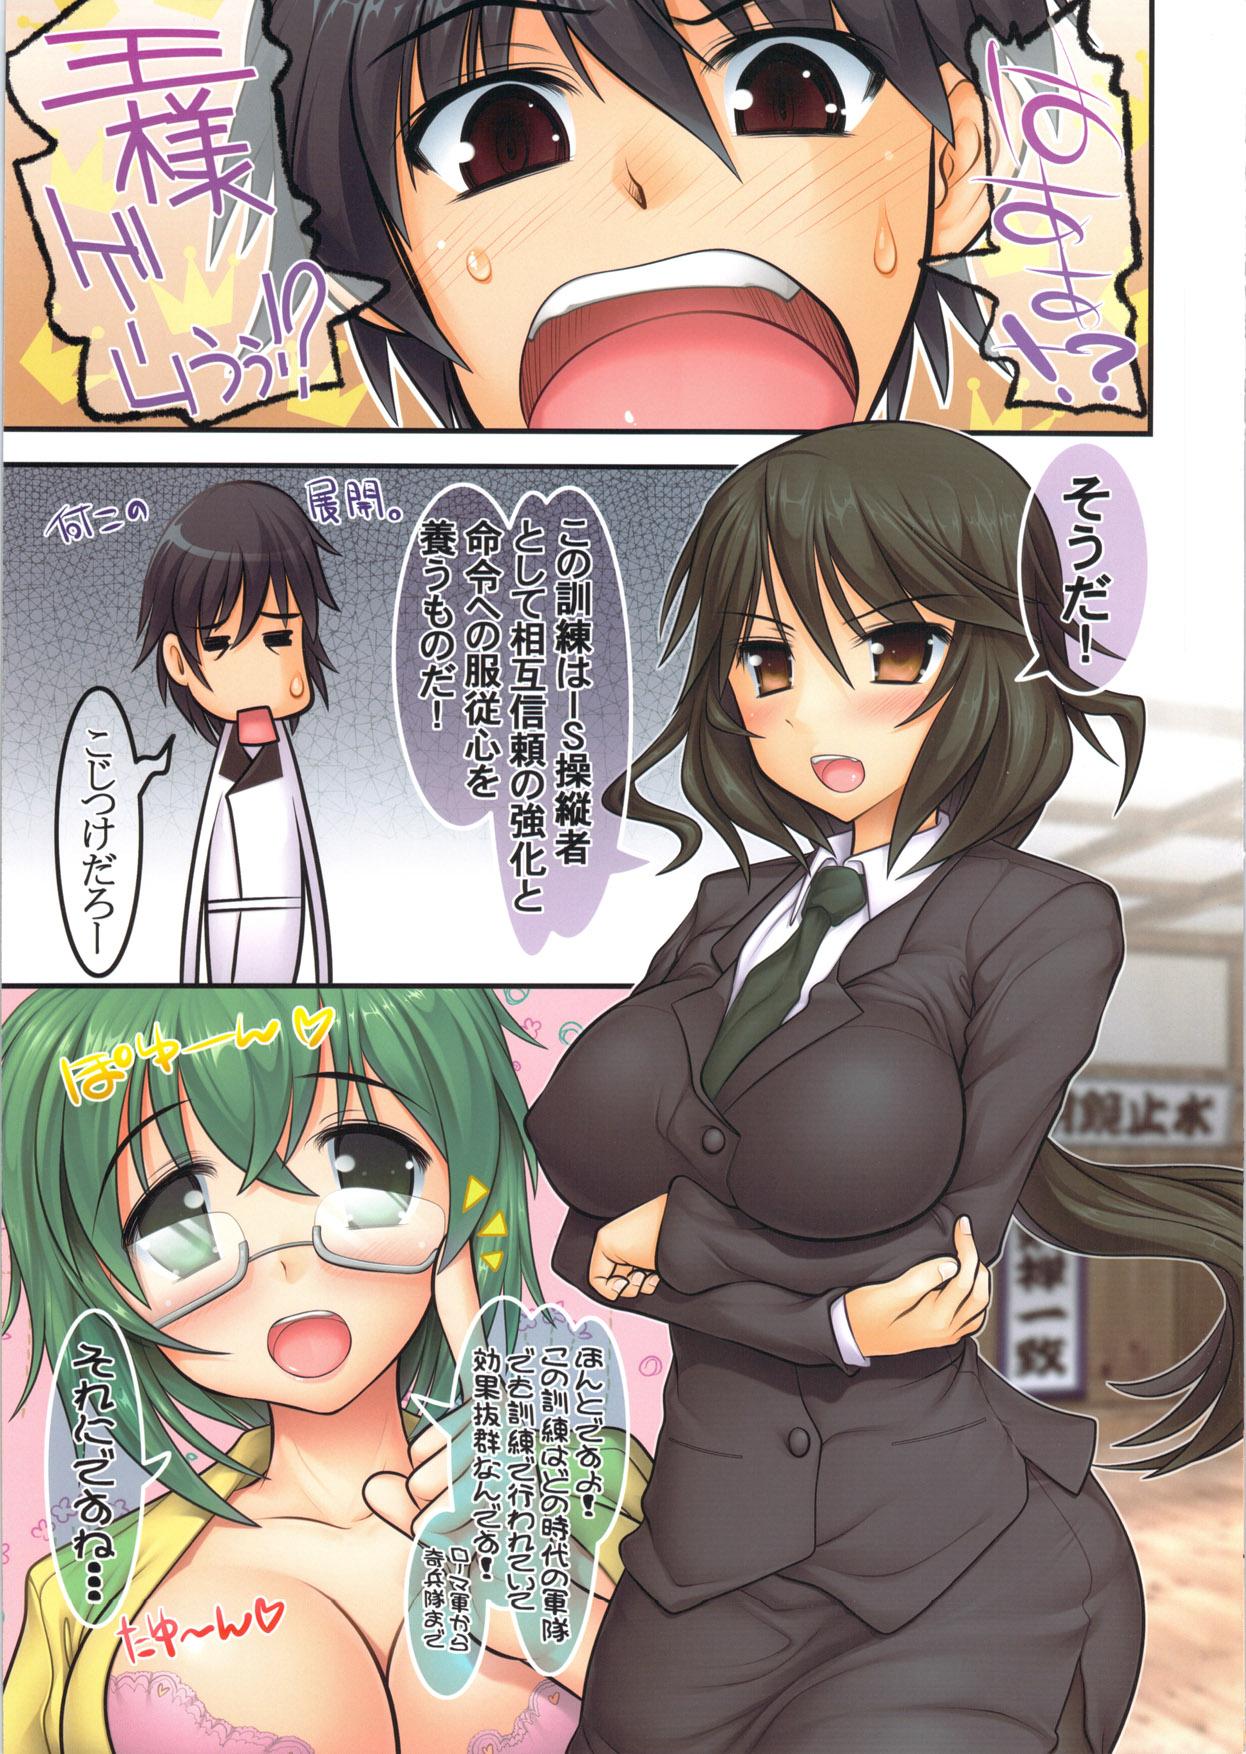 Fuck My Pussy Char to Cecilia to Sonota to Ousama Game! - Infinite stratos Gay Boys - Page 3